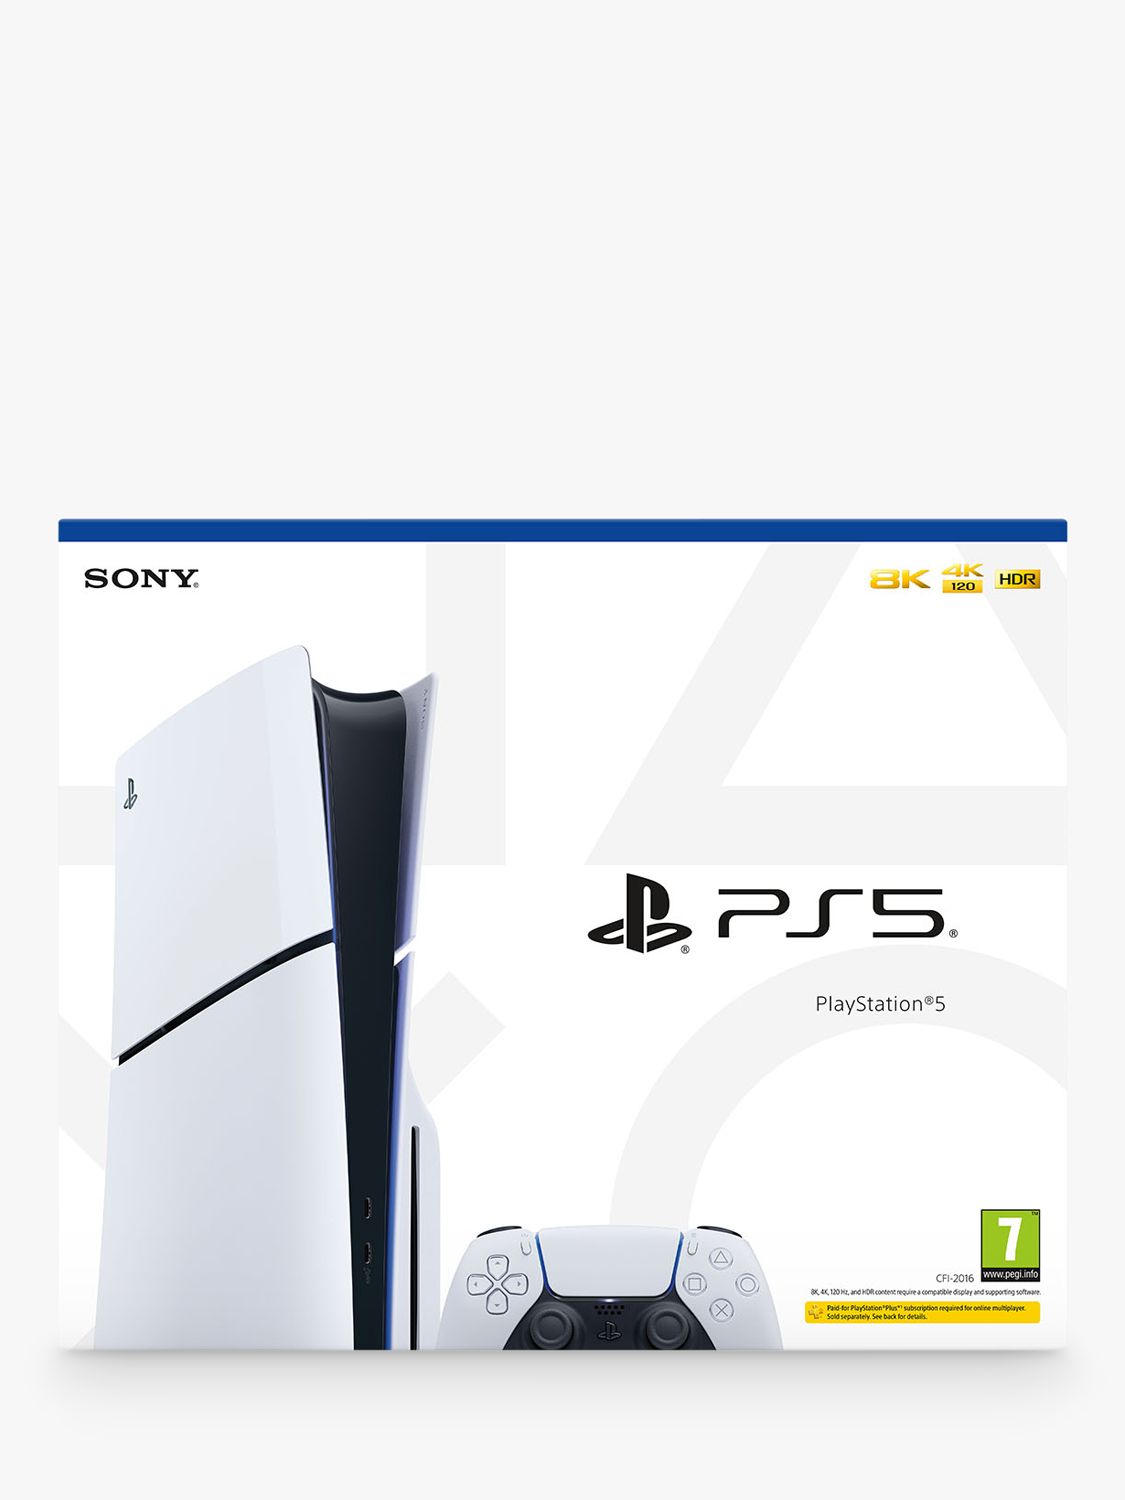 PlayStation 5 (Model Group - Slim) Console with DualSense